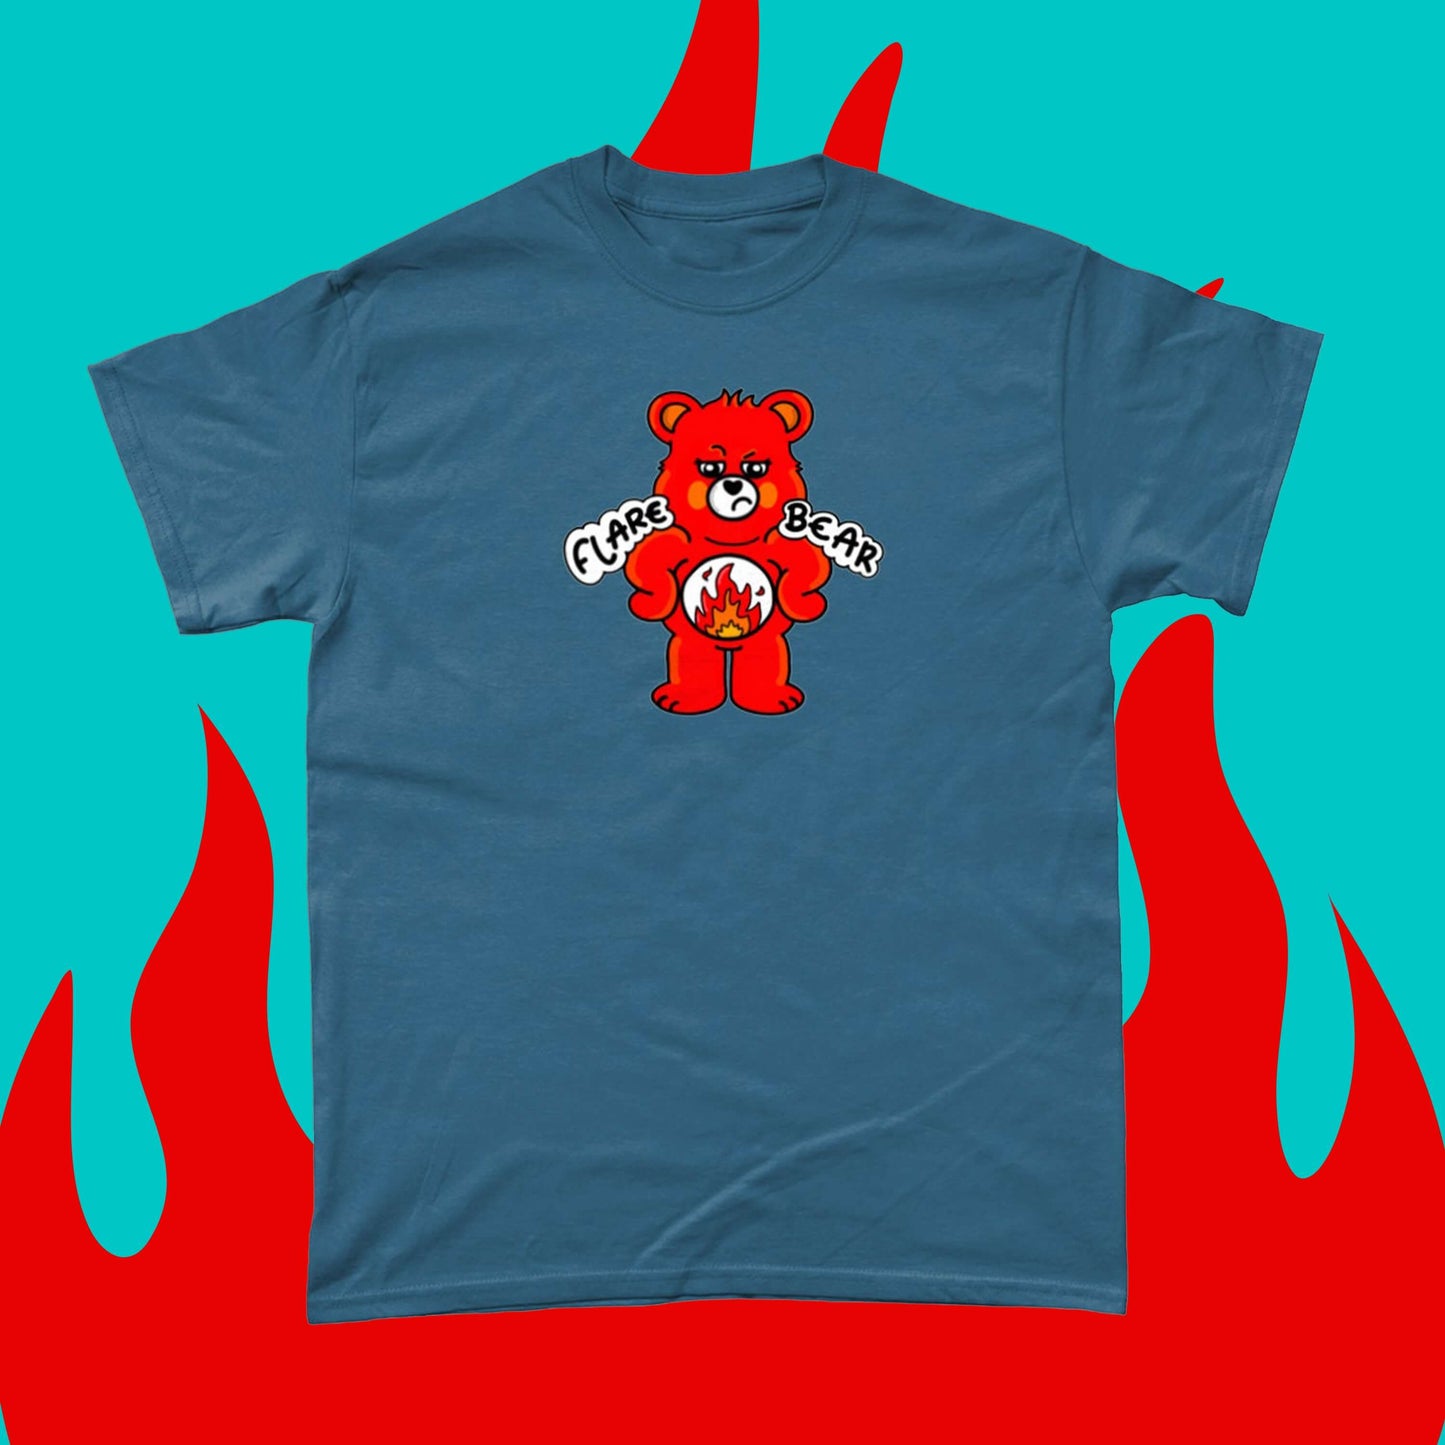 Flare Bear T-shirt on a blue and red flame background. The indigo blue short sleeve tshirt is of a red bear with a fed up expression and hands on its hips. There is a white circle on its belly with flames inside. Flare Bear is written on the middle. The tshirt is designed to raise awareness for chronic illness flare ups.